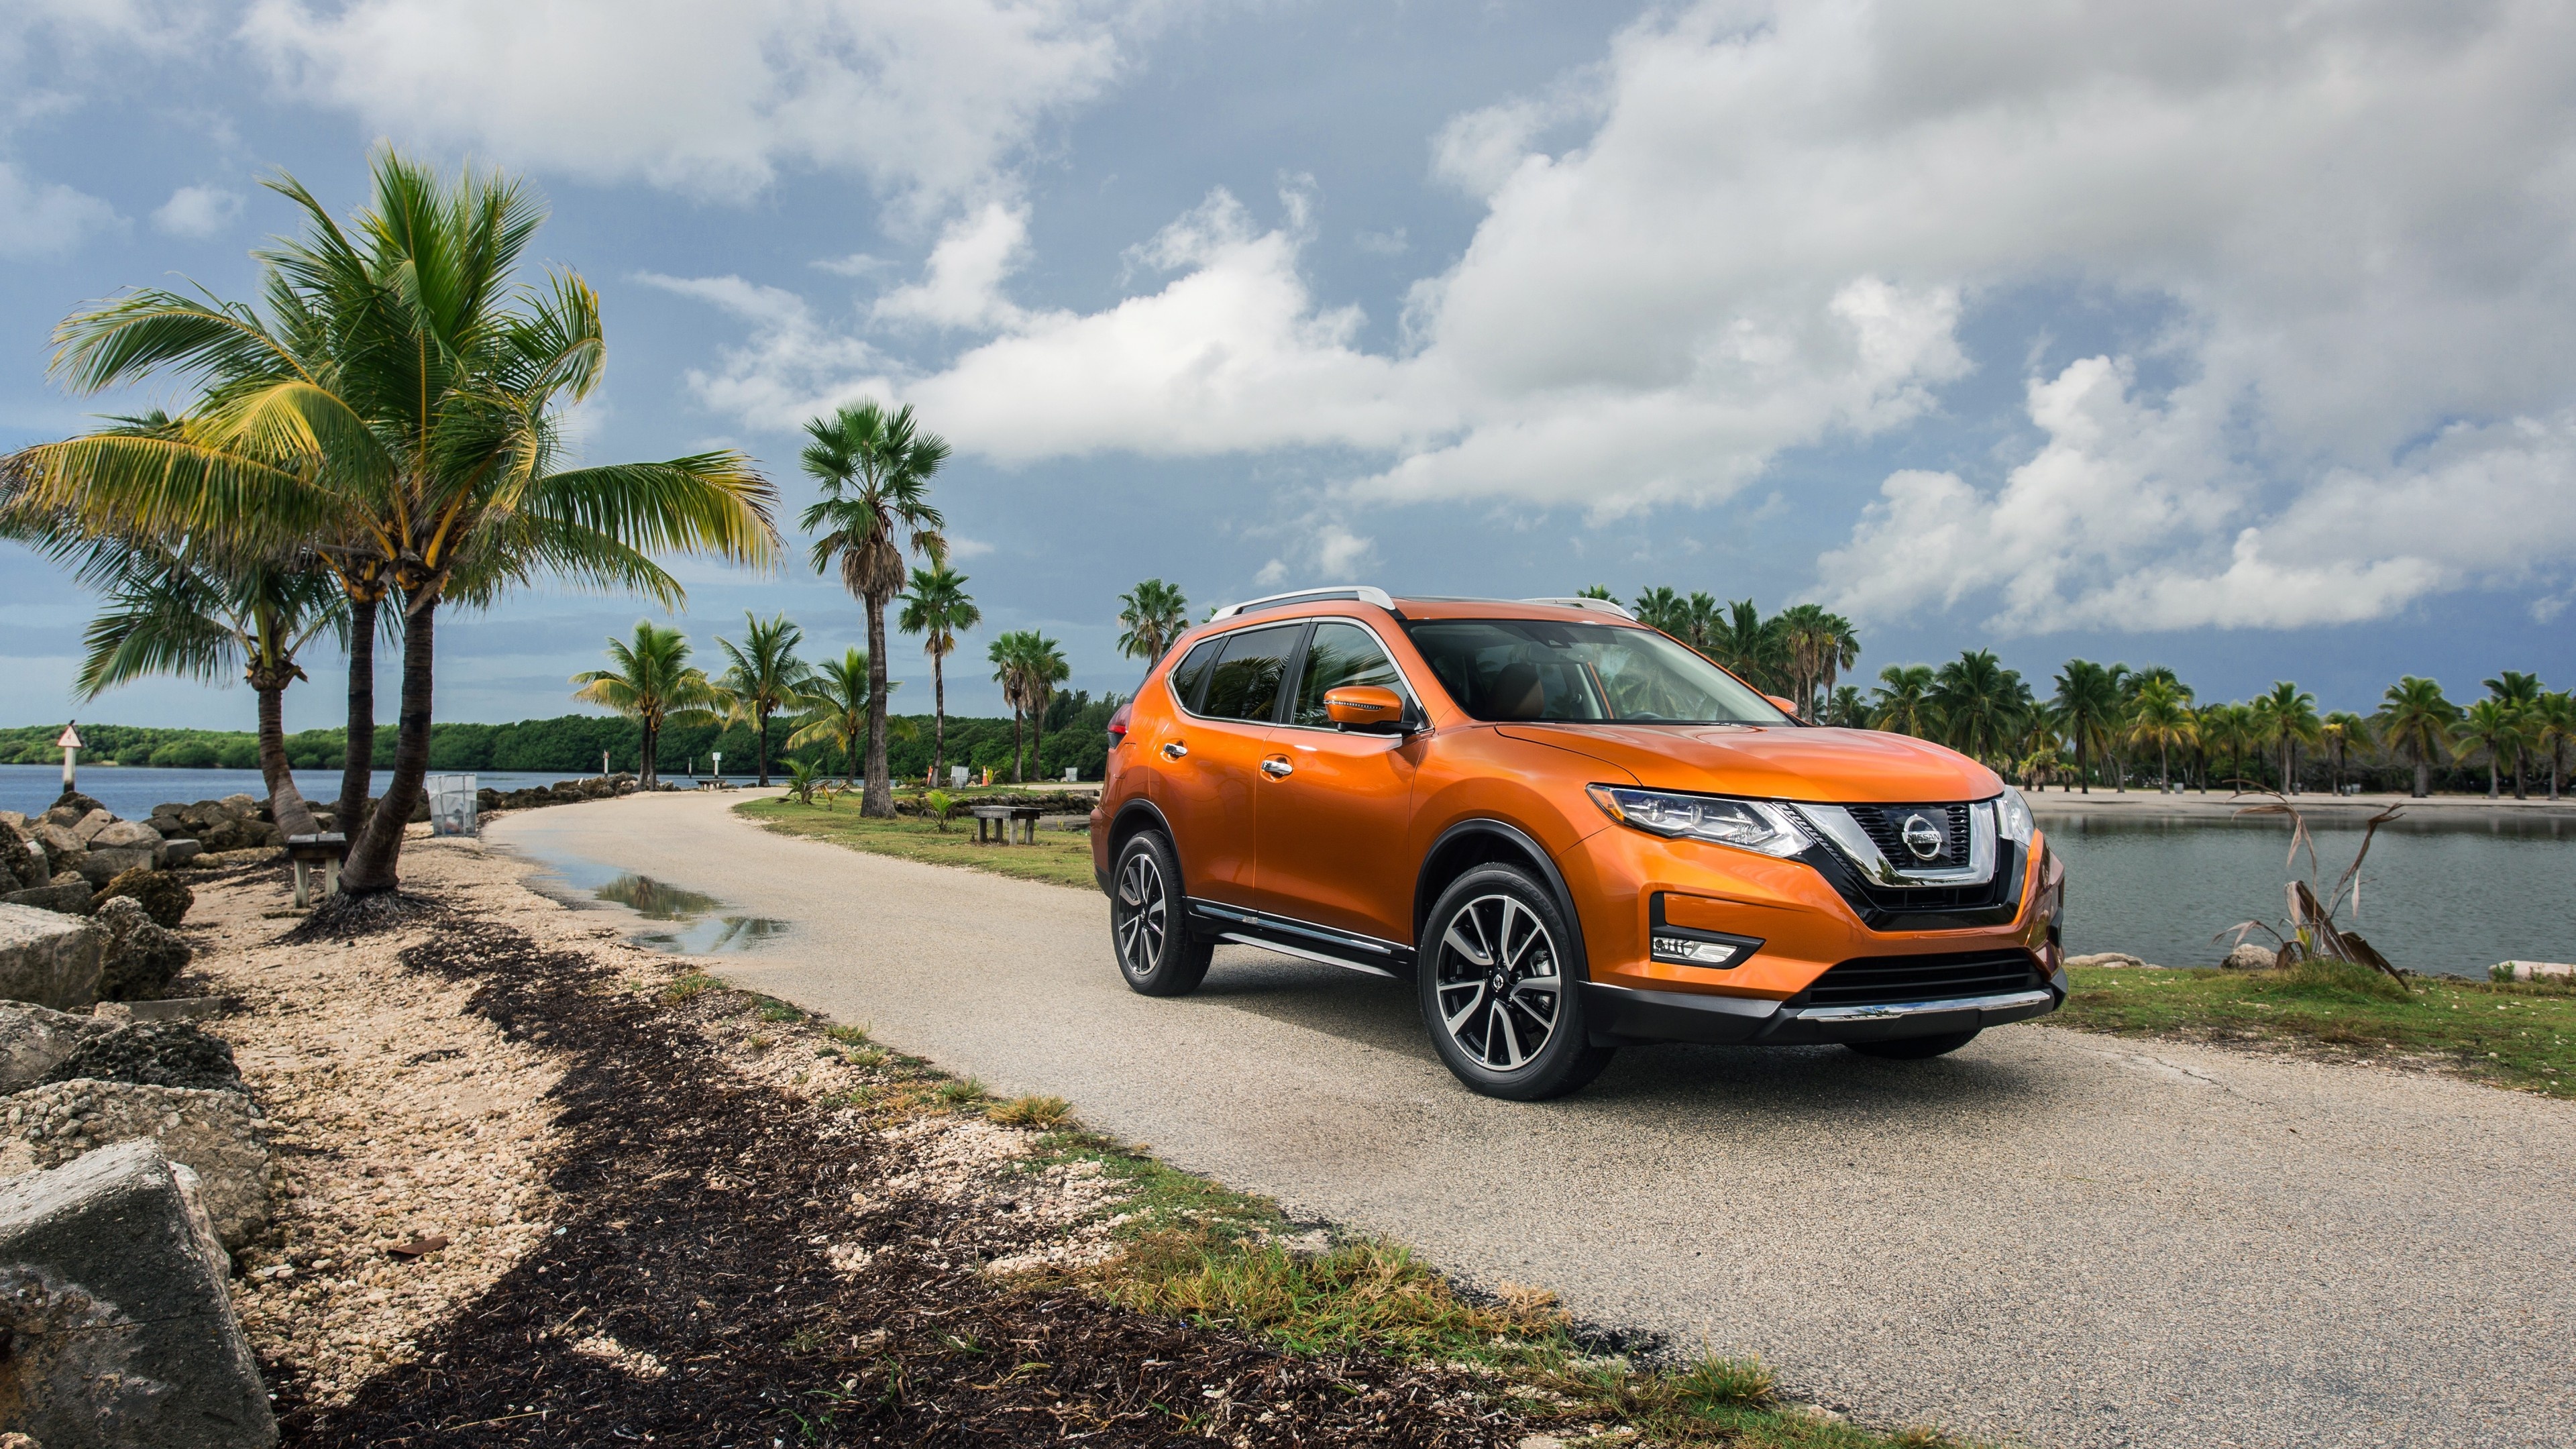 Nissan Rogue, Orange crossover, Stylish and sporty, Stand out from the crowd, 3840x2160 4K Desktop